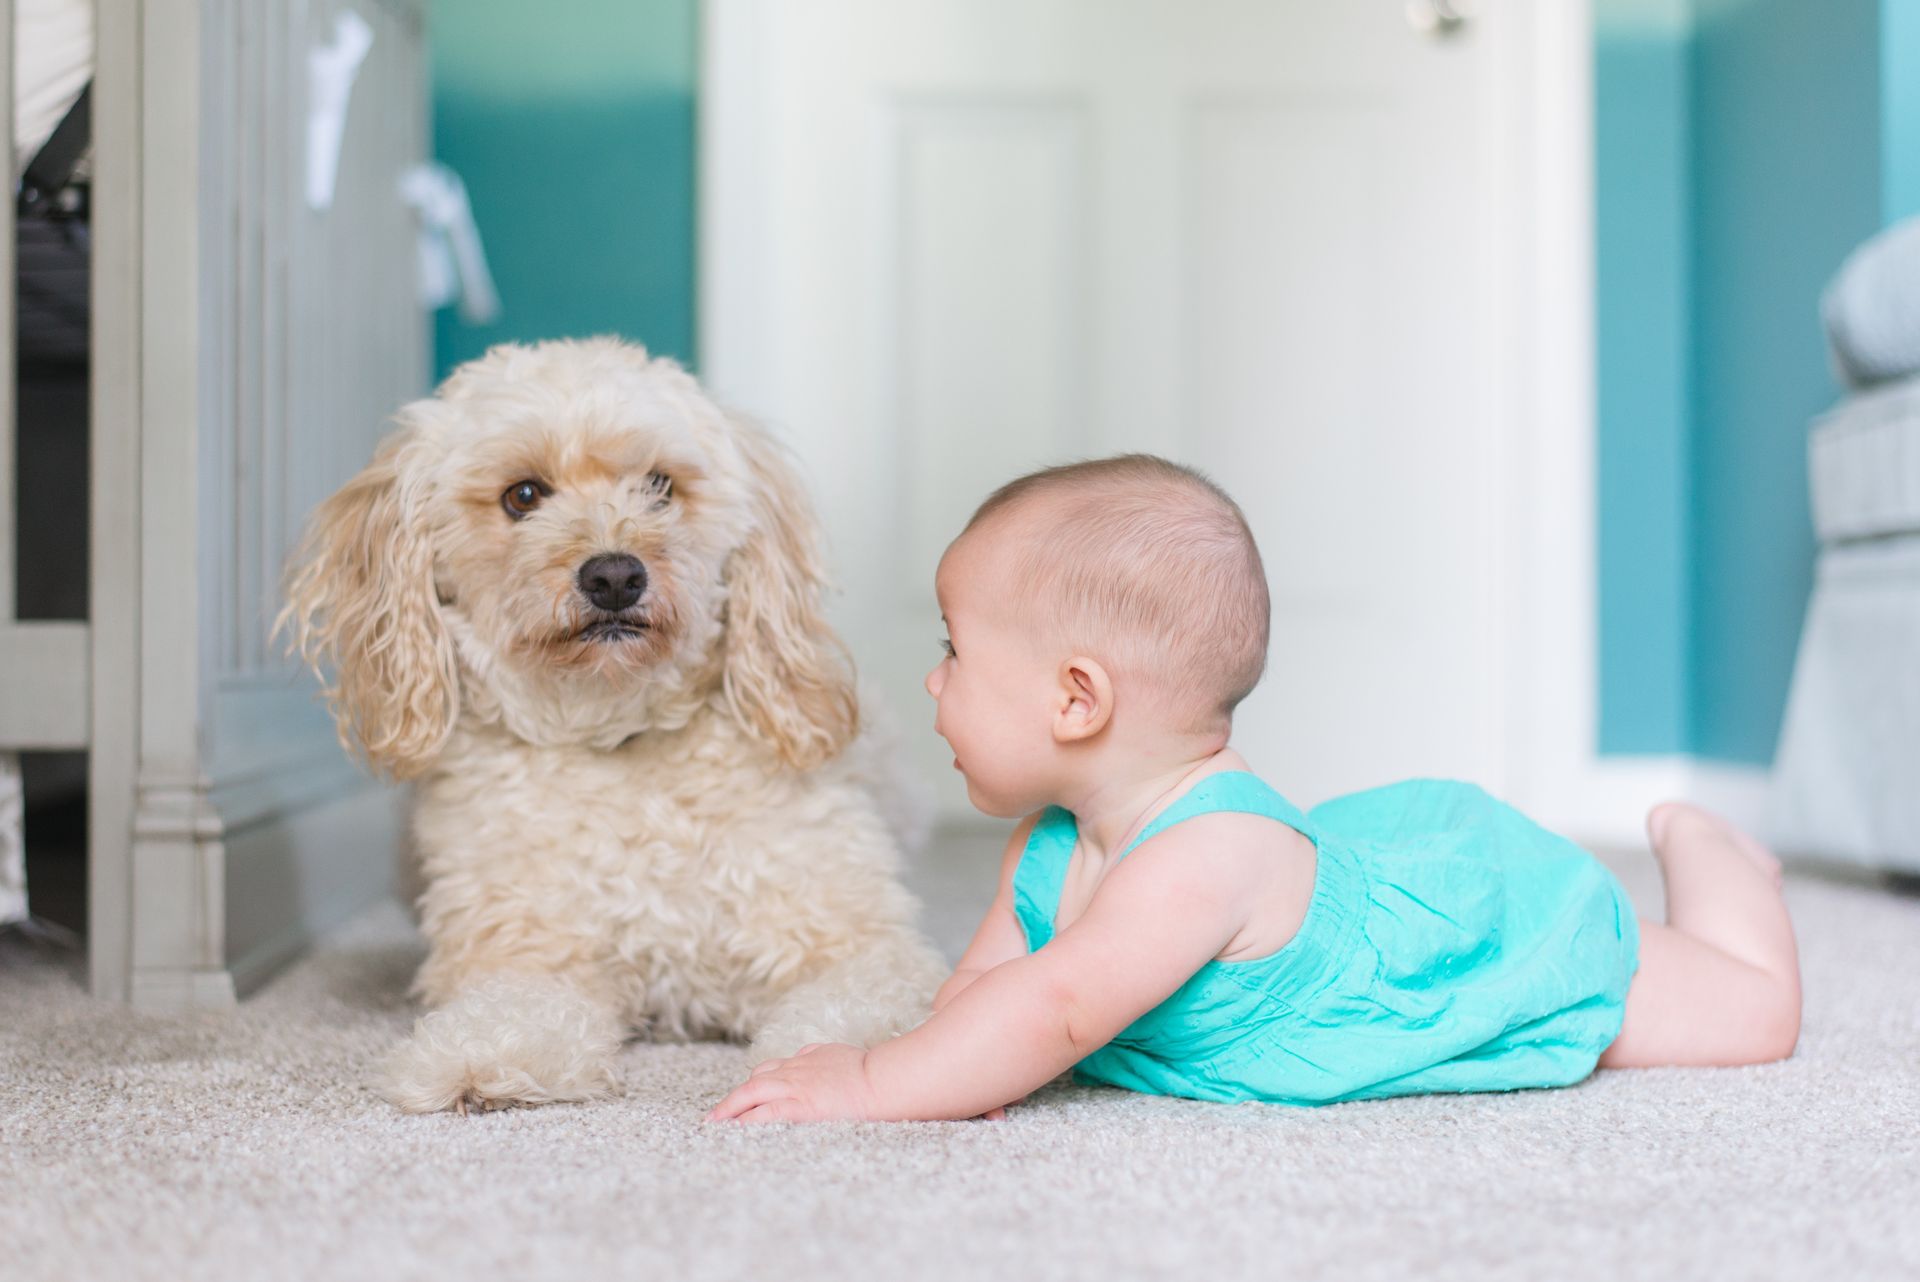 The Pro's in Carpet cleaning services. If your home carpet has pet orders call us to leave your home smelling fresh again. 